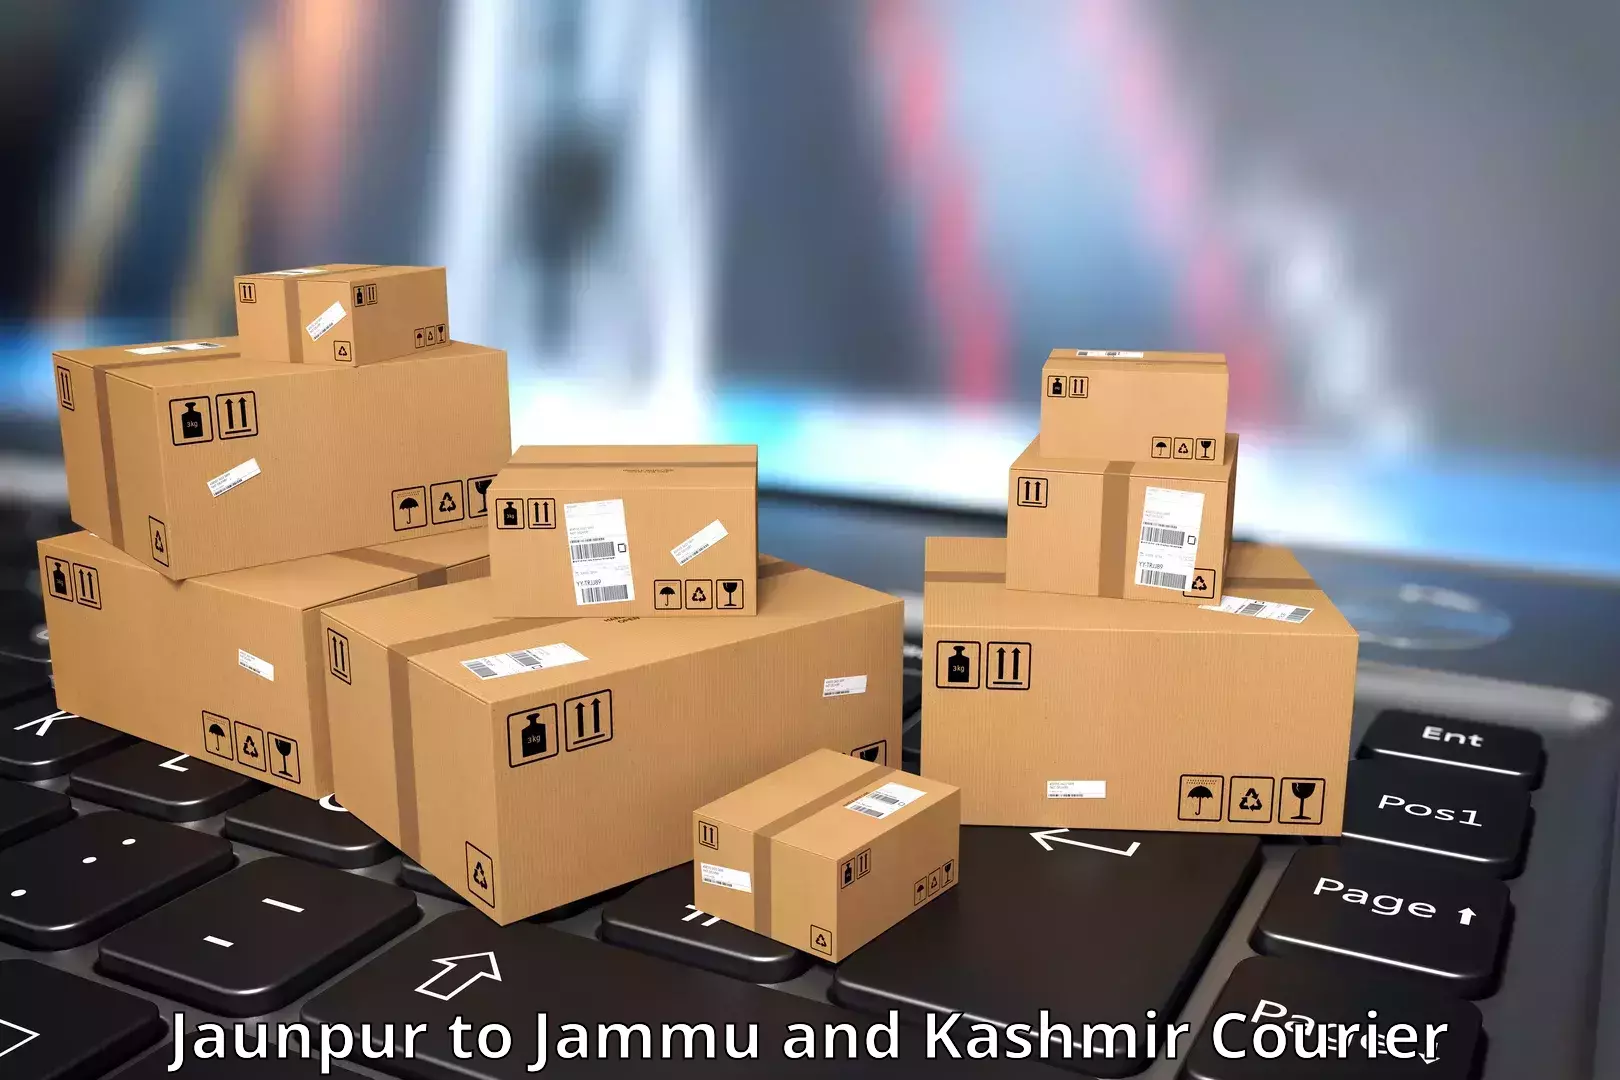 Global shipping networks Jaunpur to Leh